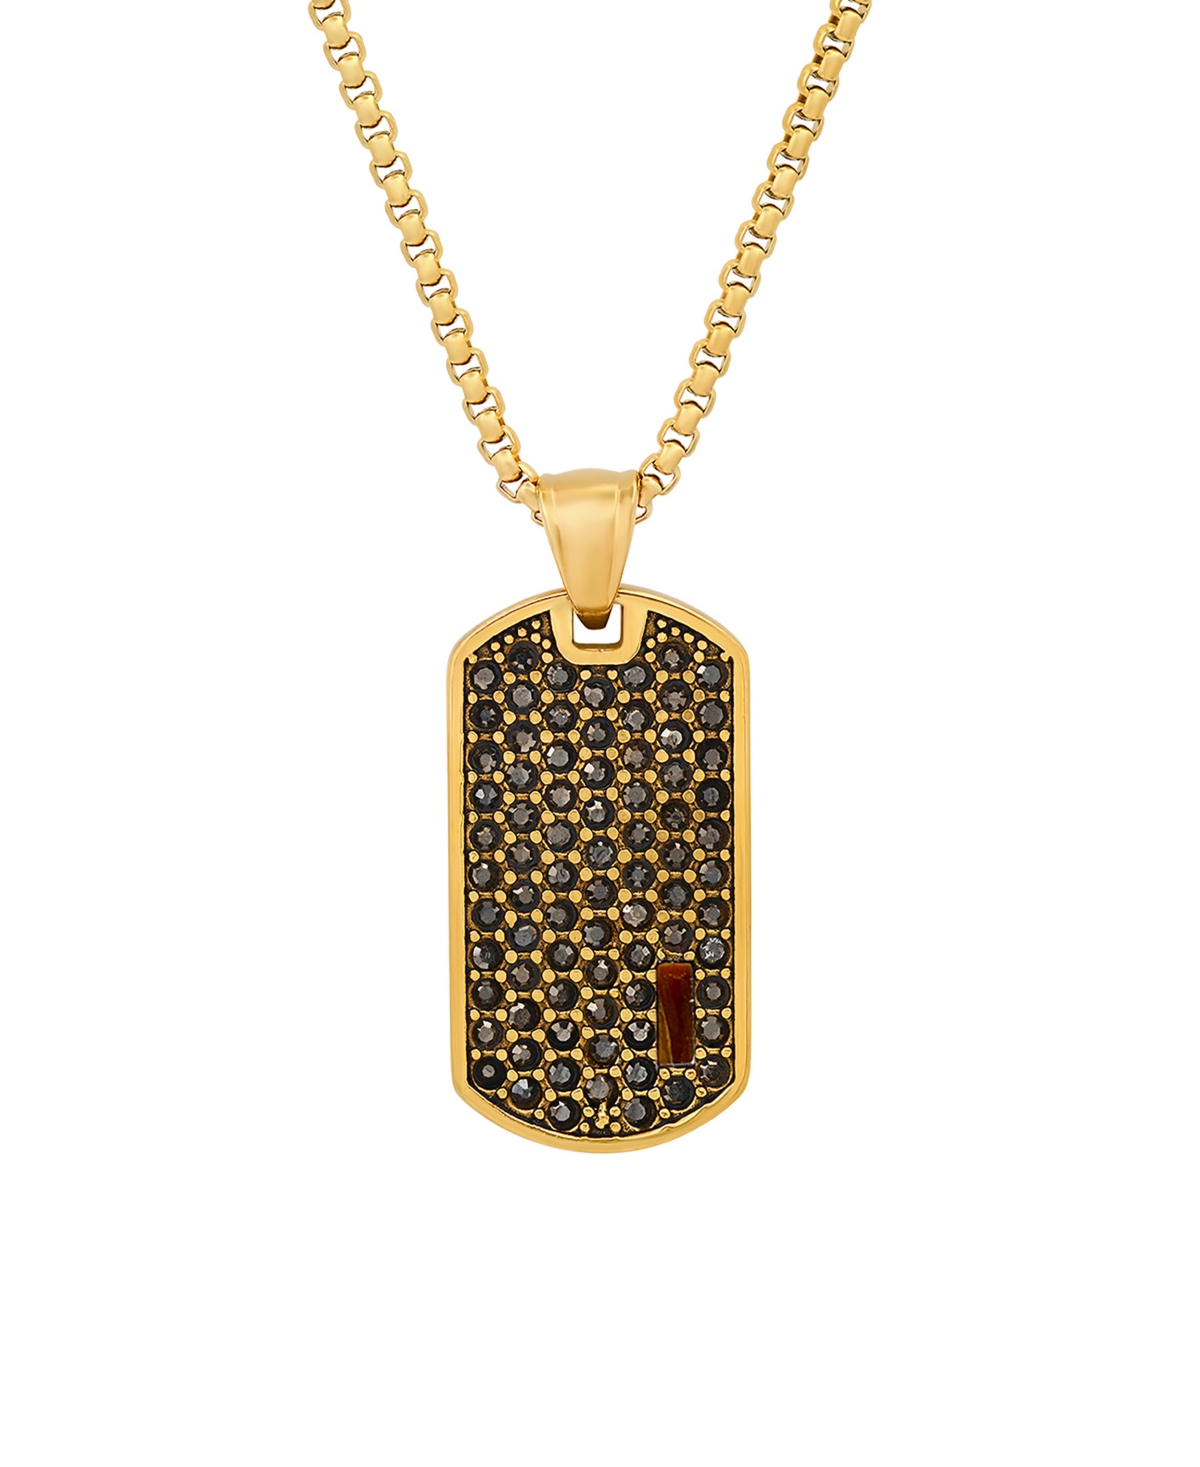 Men's 18k Gold Plated Stainless Steel Simulated Diamonds and Tiger Eye Dog Tag Pendant - Gold Plated